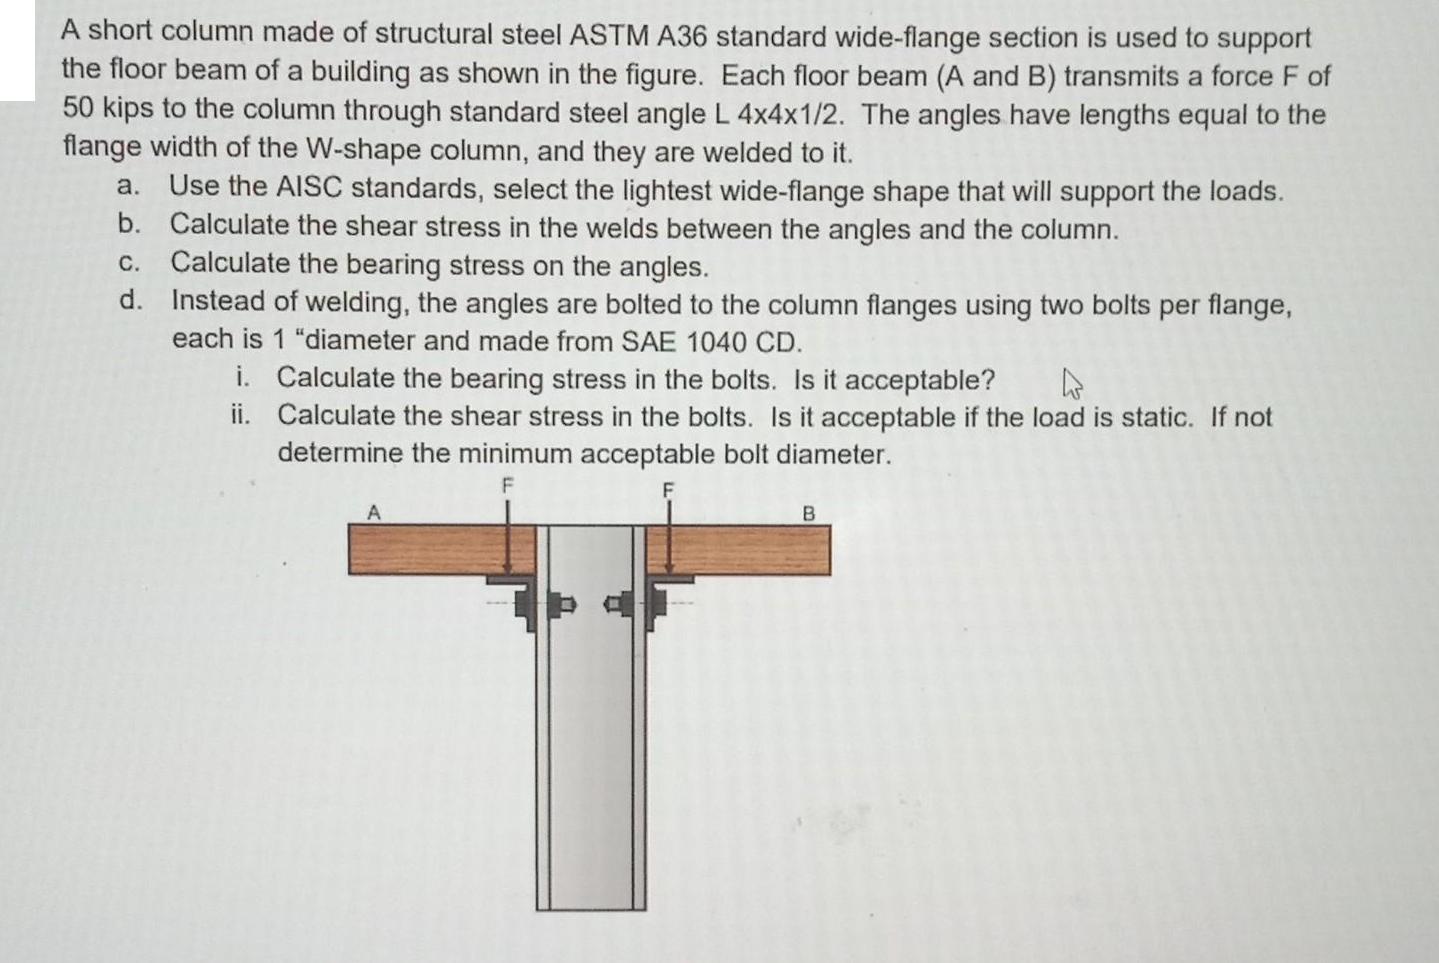 A short column made of structural steel ASTM A36 standard wide-flange section is used to support the floor